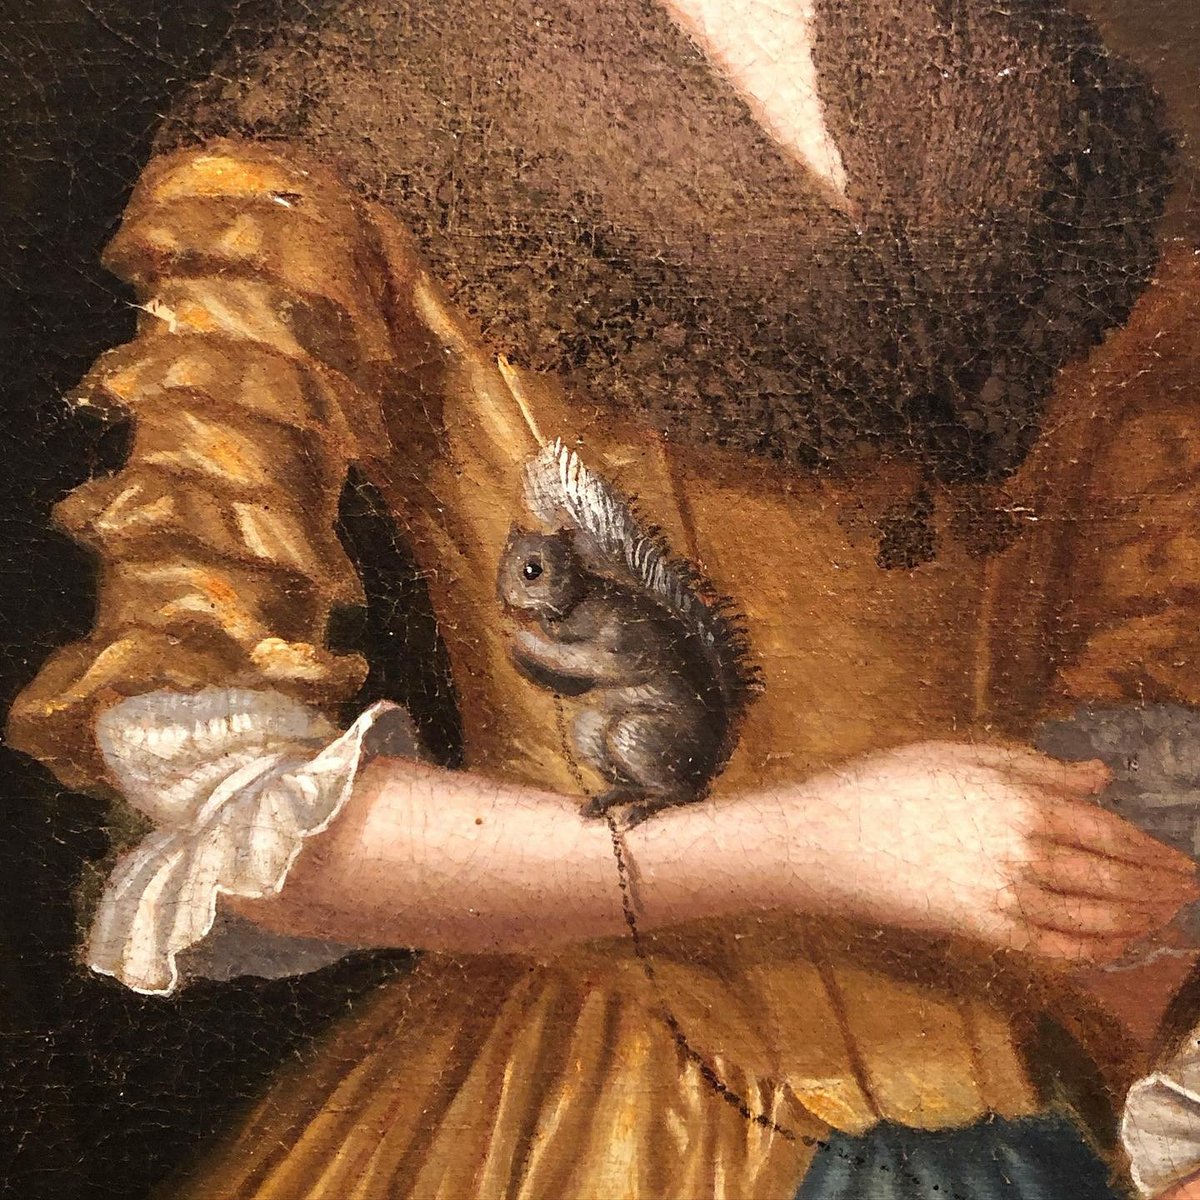 Squirrelly detail from a 1771 portrait of the New York Wiley family by William Williams. @americanart 
 #vastearlyamerica #americanart #atsaam #squirrelsgonewild